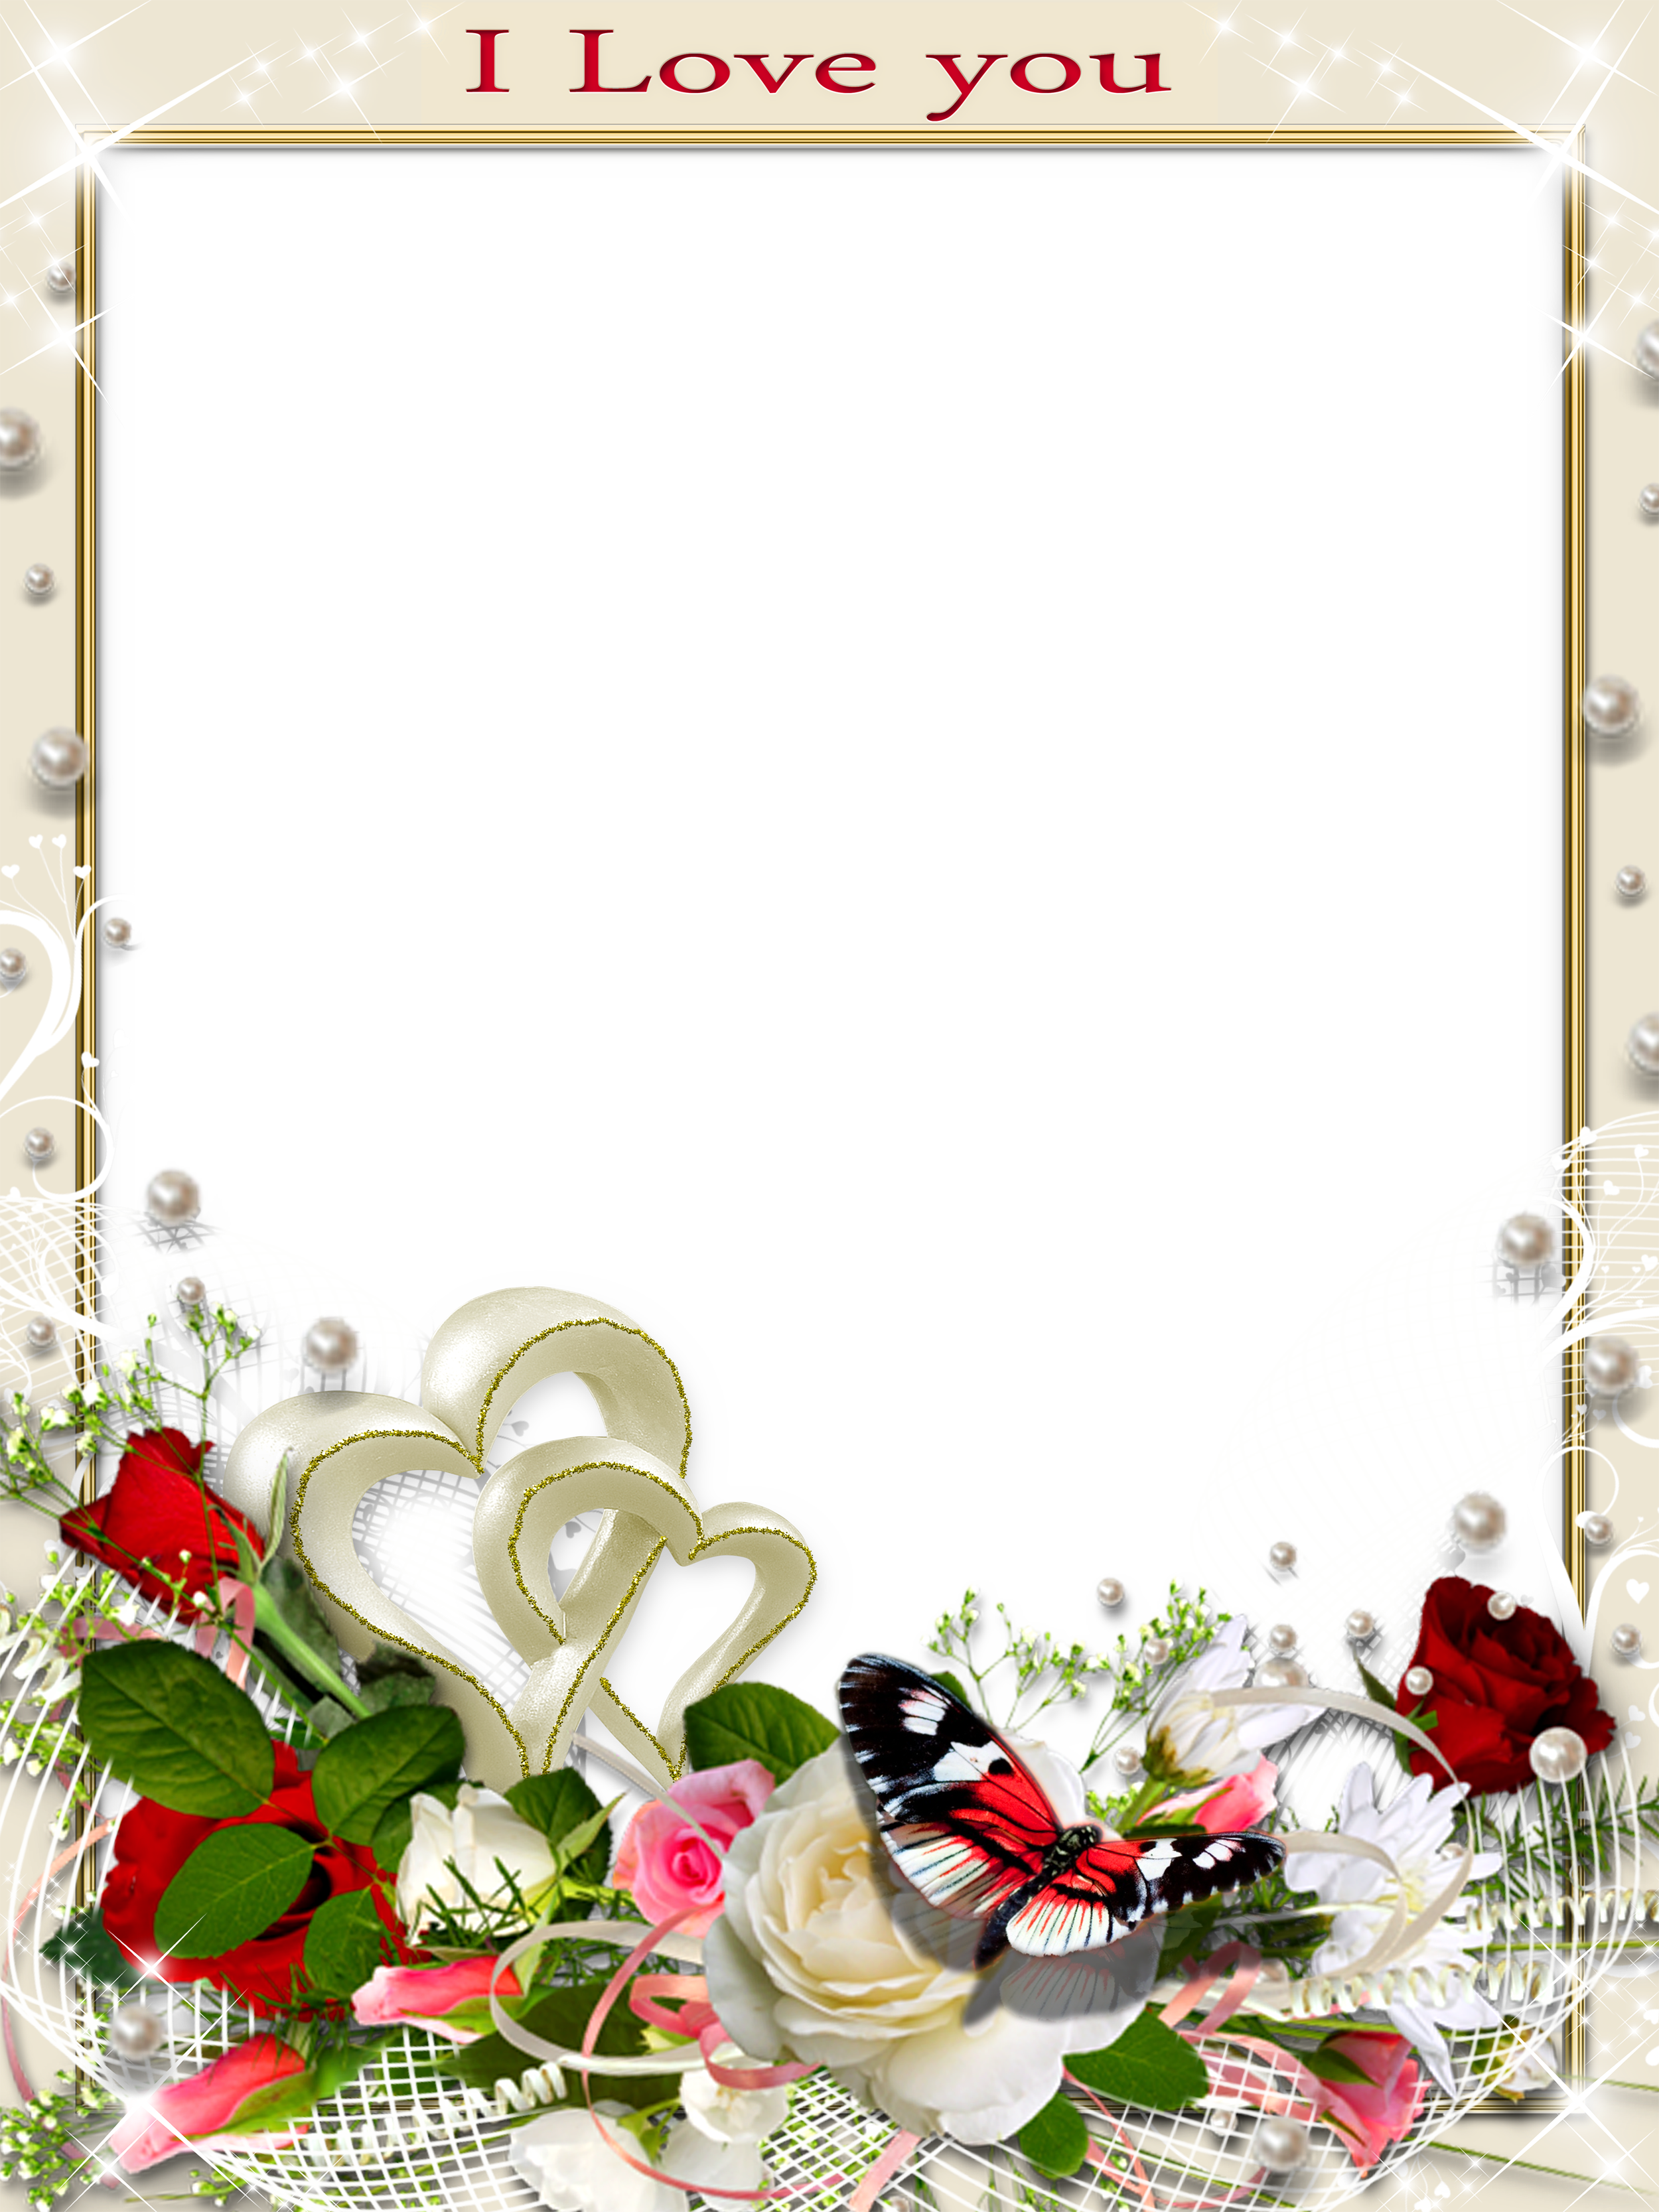 Transparent Romantic Frame Love You Gallery Yopriceville High Quality Images And Transparent Png Free Clipart